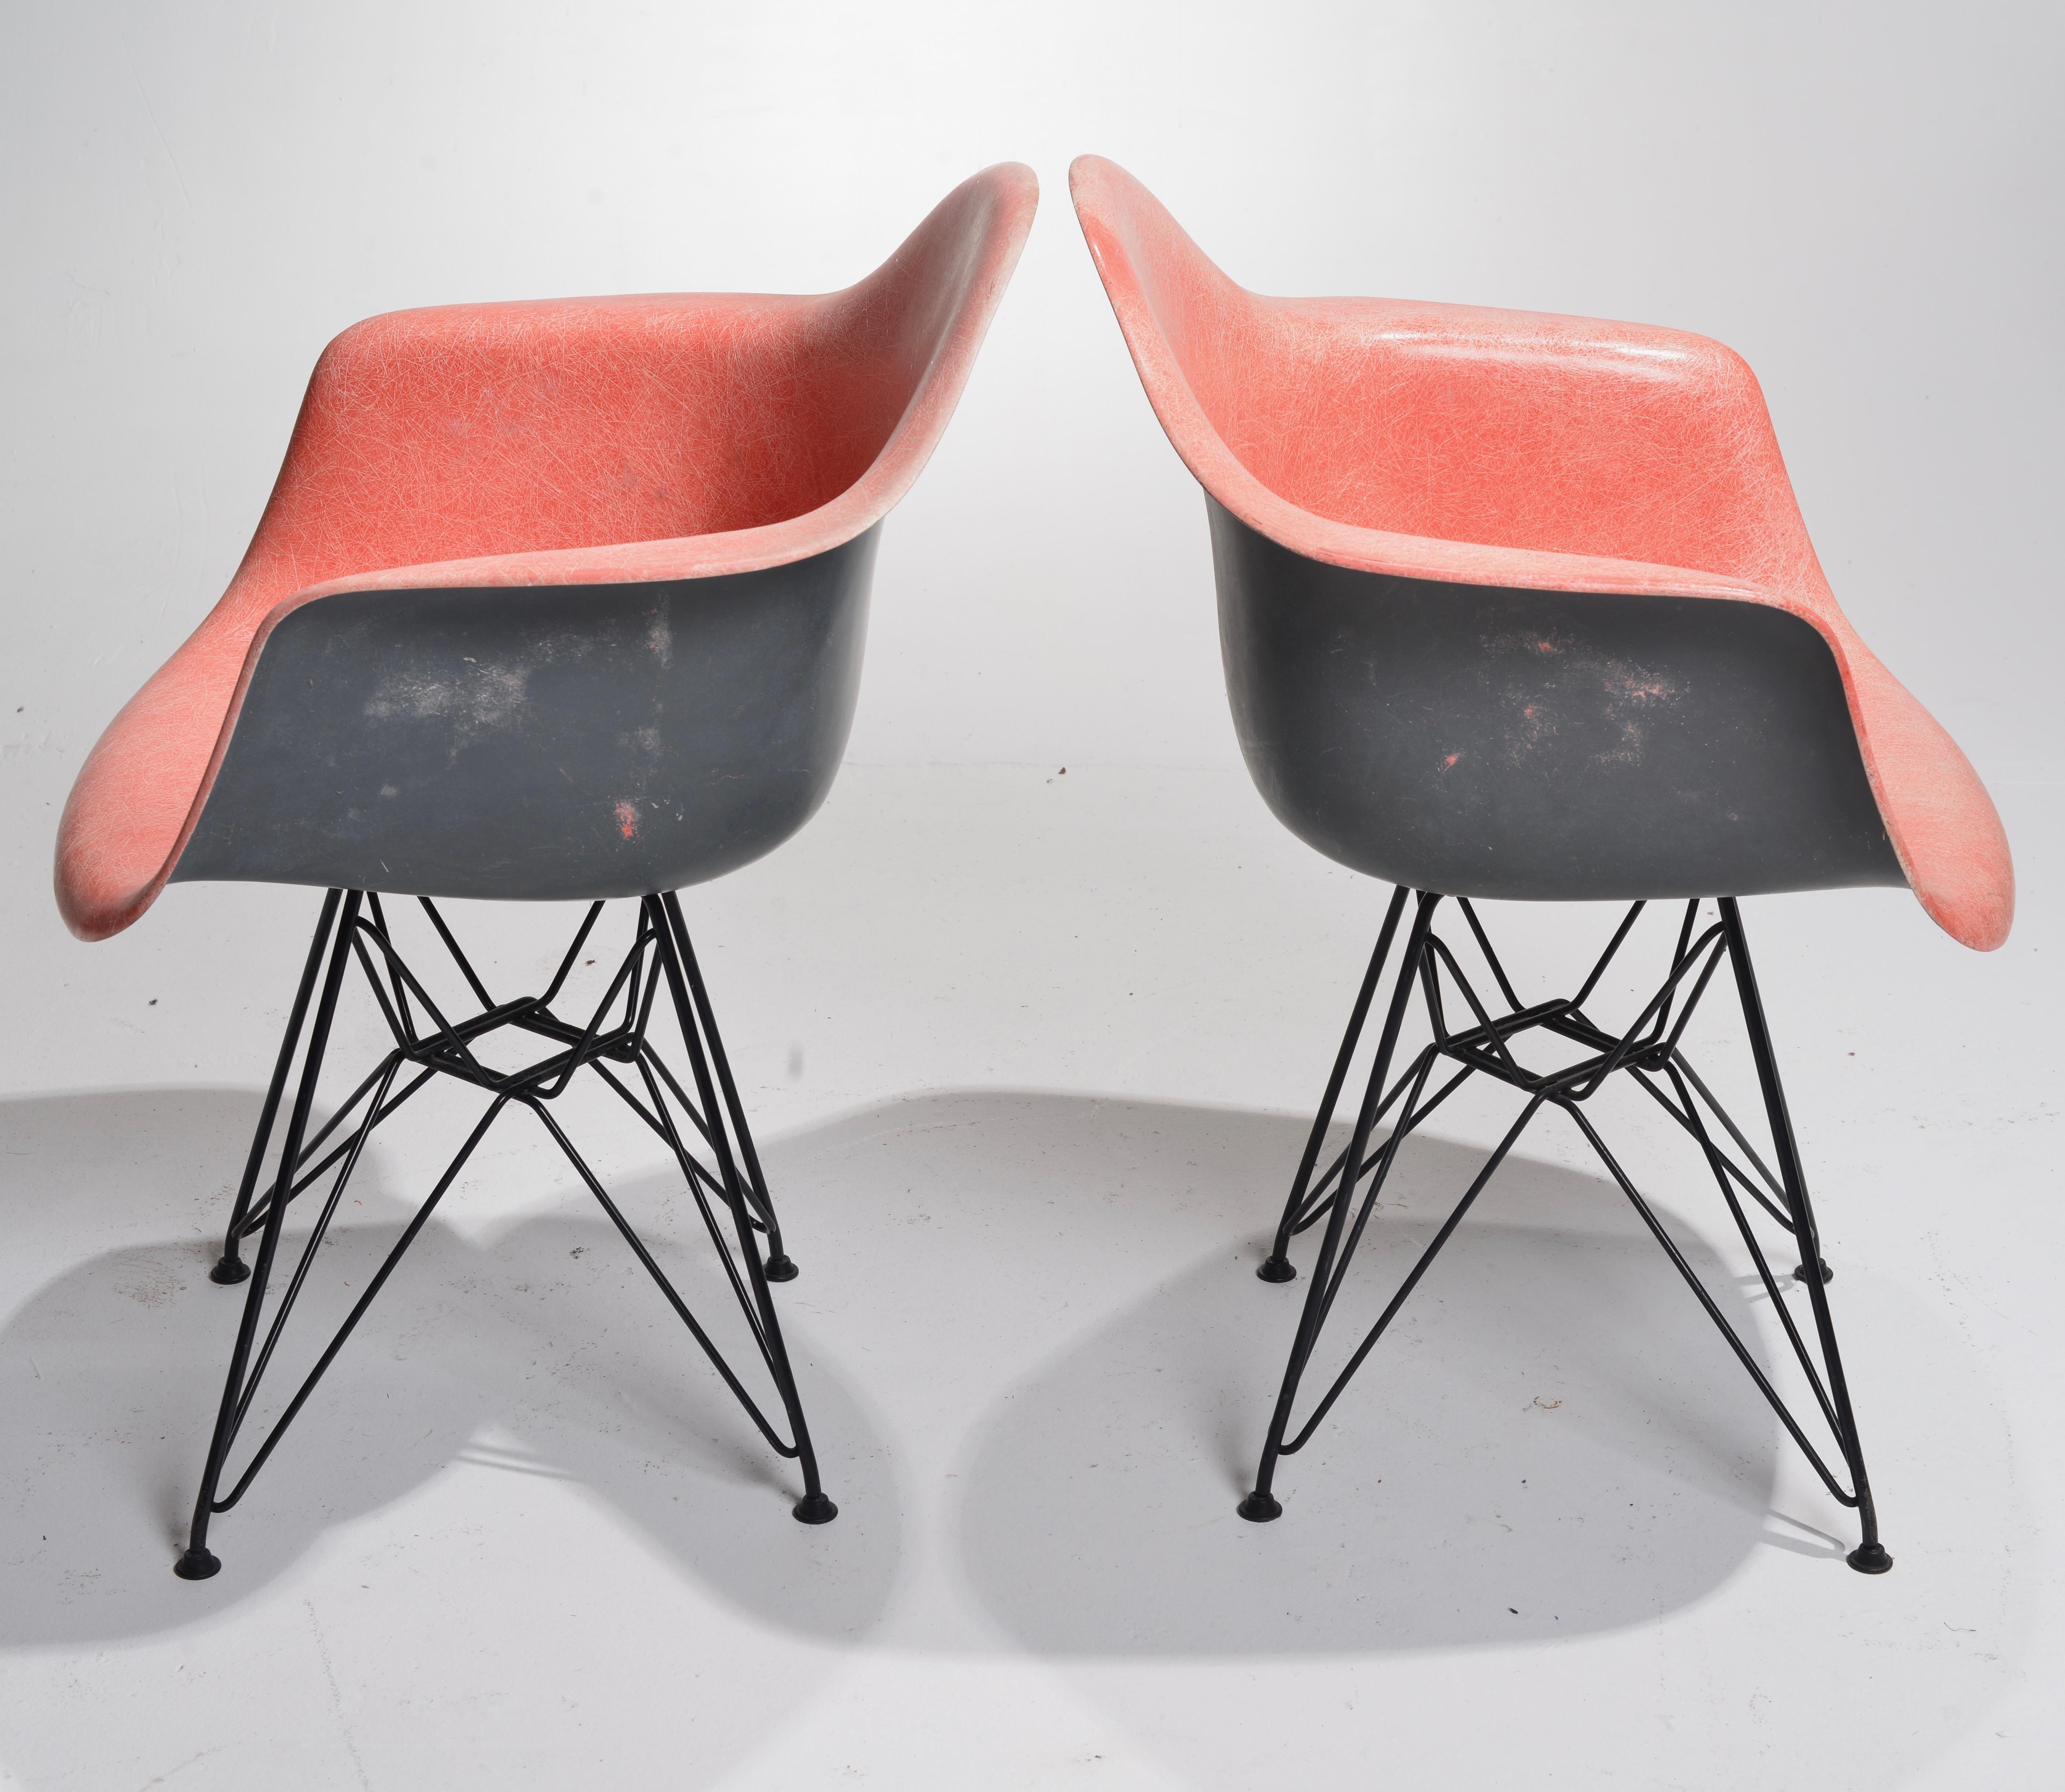 Zenith Charles Eames DAR Fiberglass Shell Chairs For Sale 4